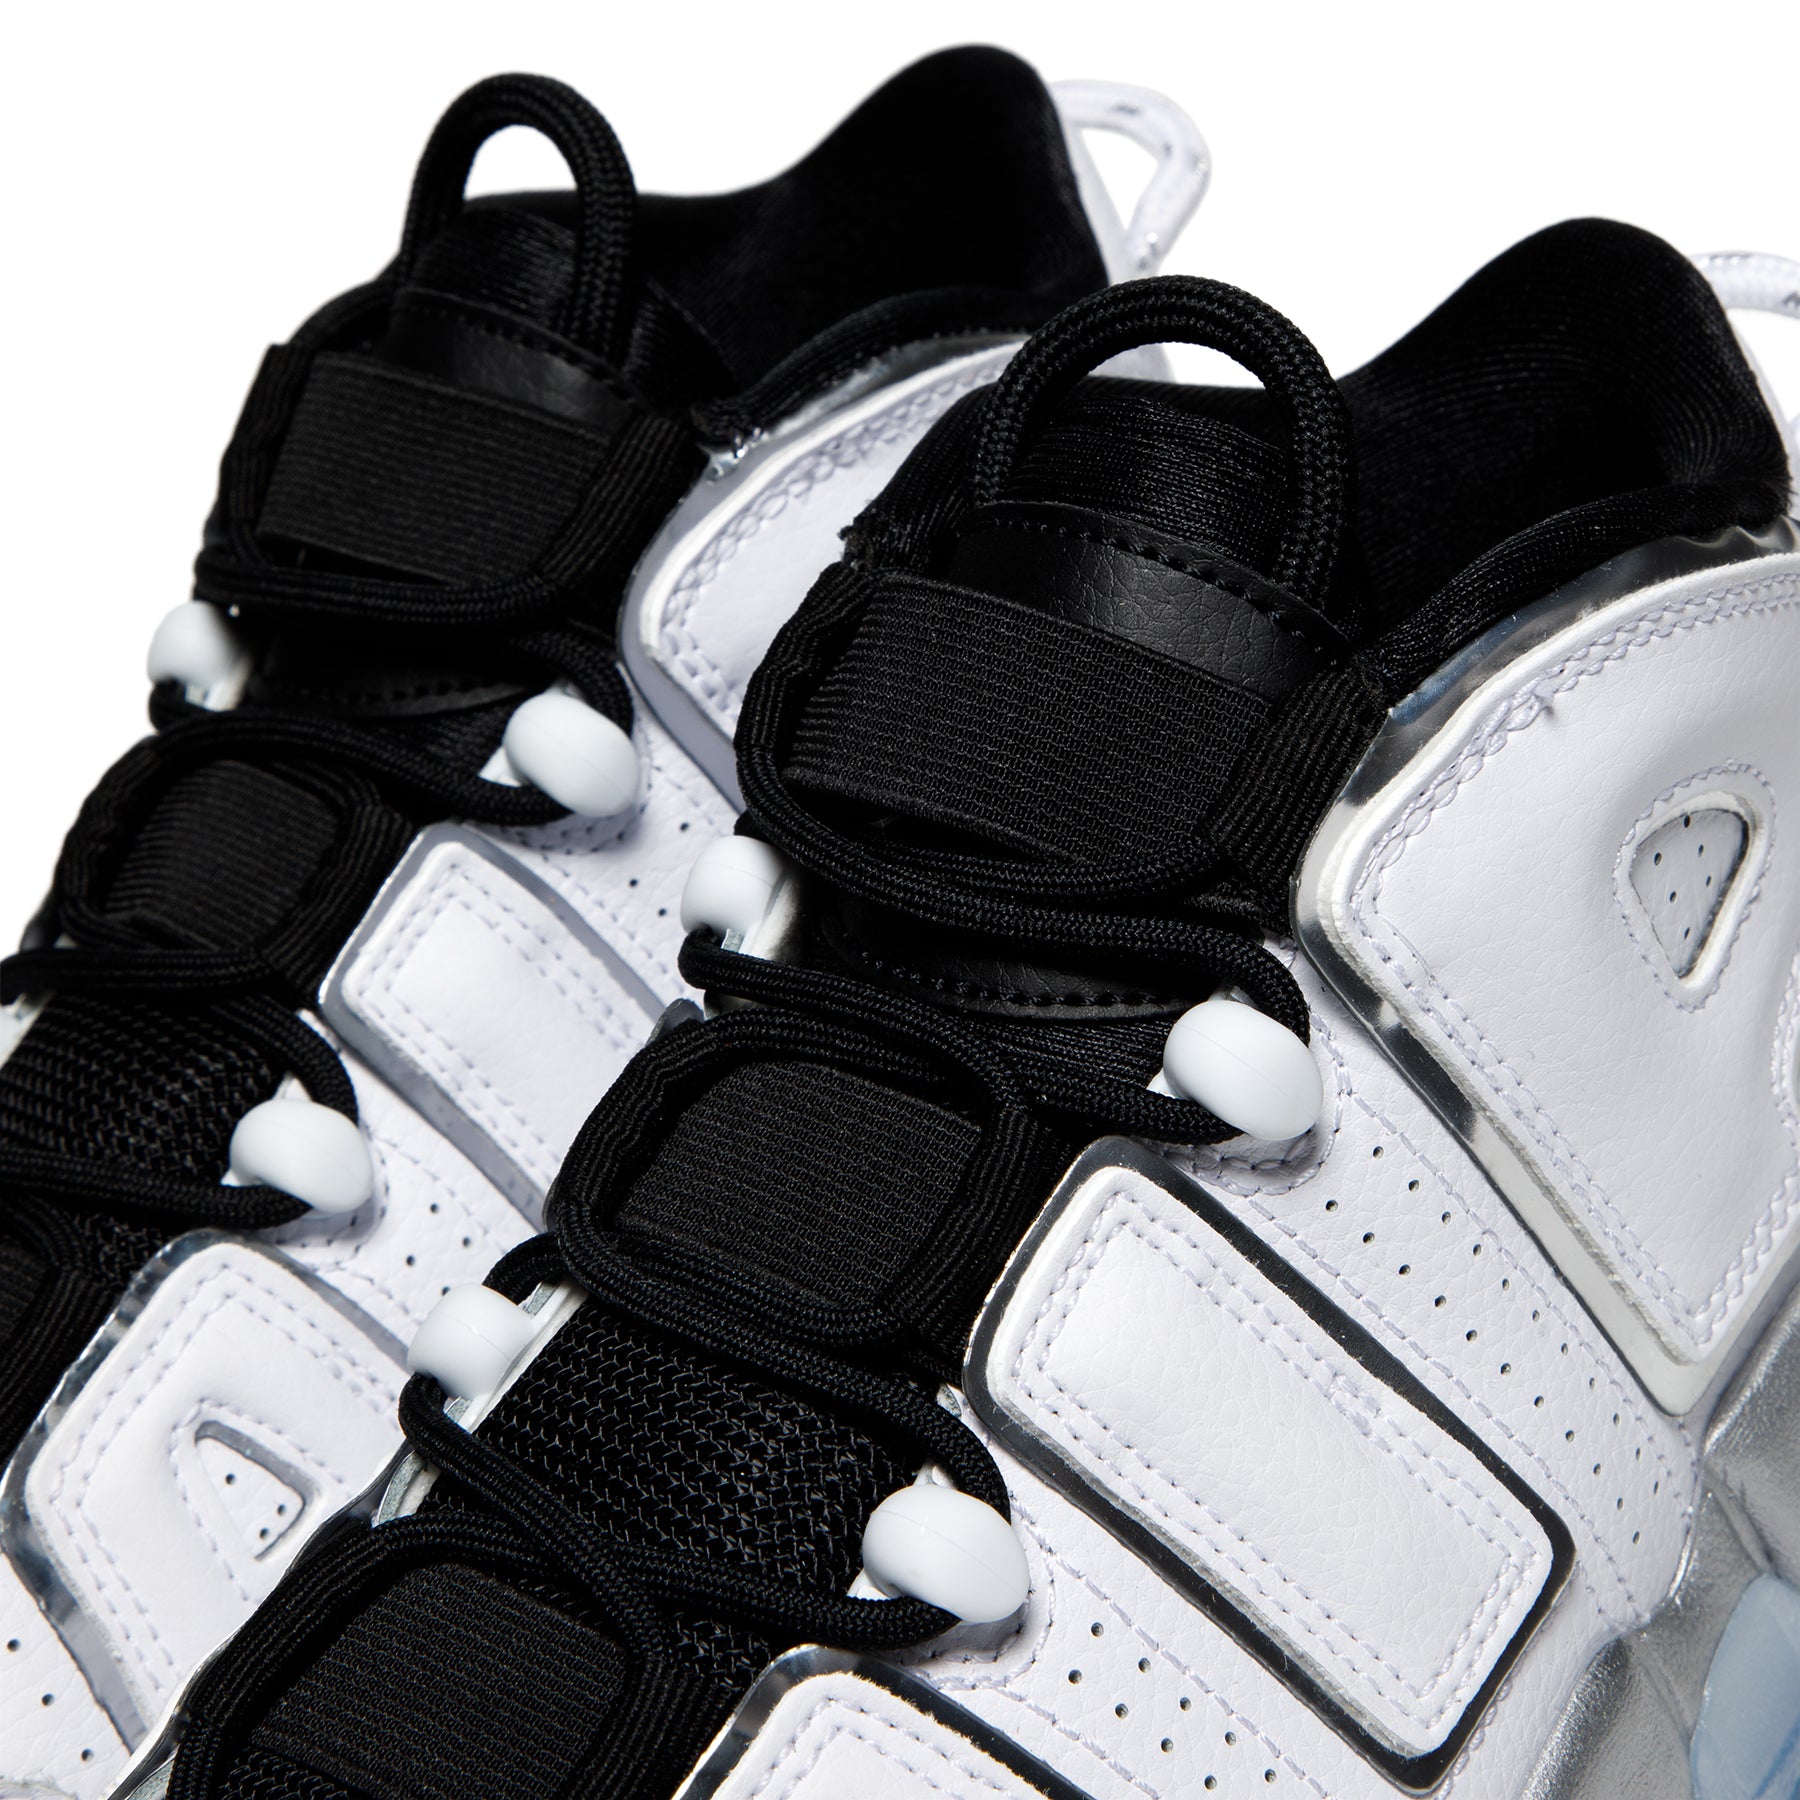 Women's shoes Nike W Air More Uptempo White/ Metallic Silver-Black-Clear